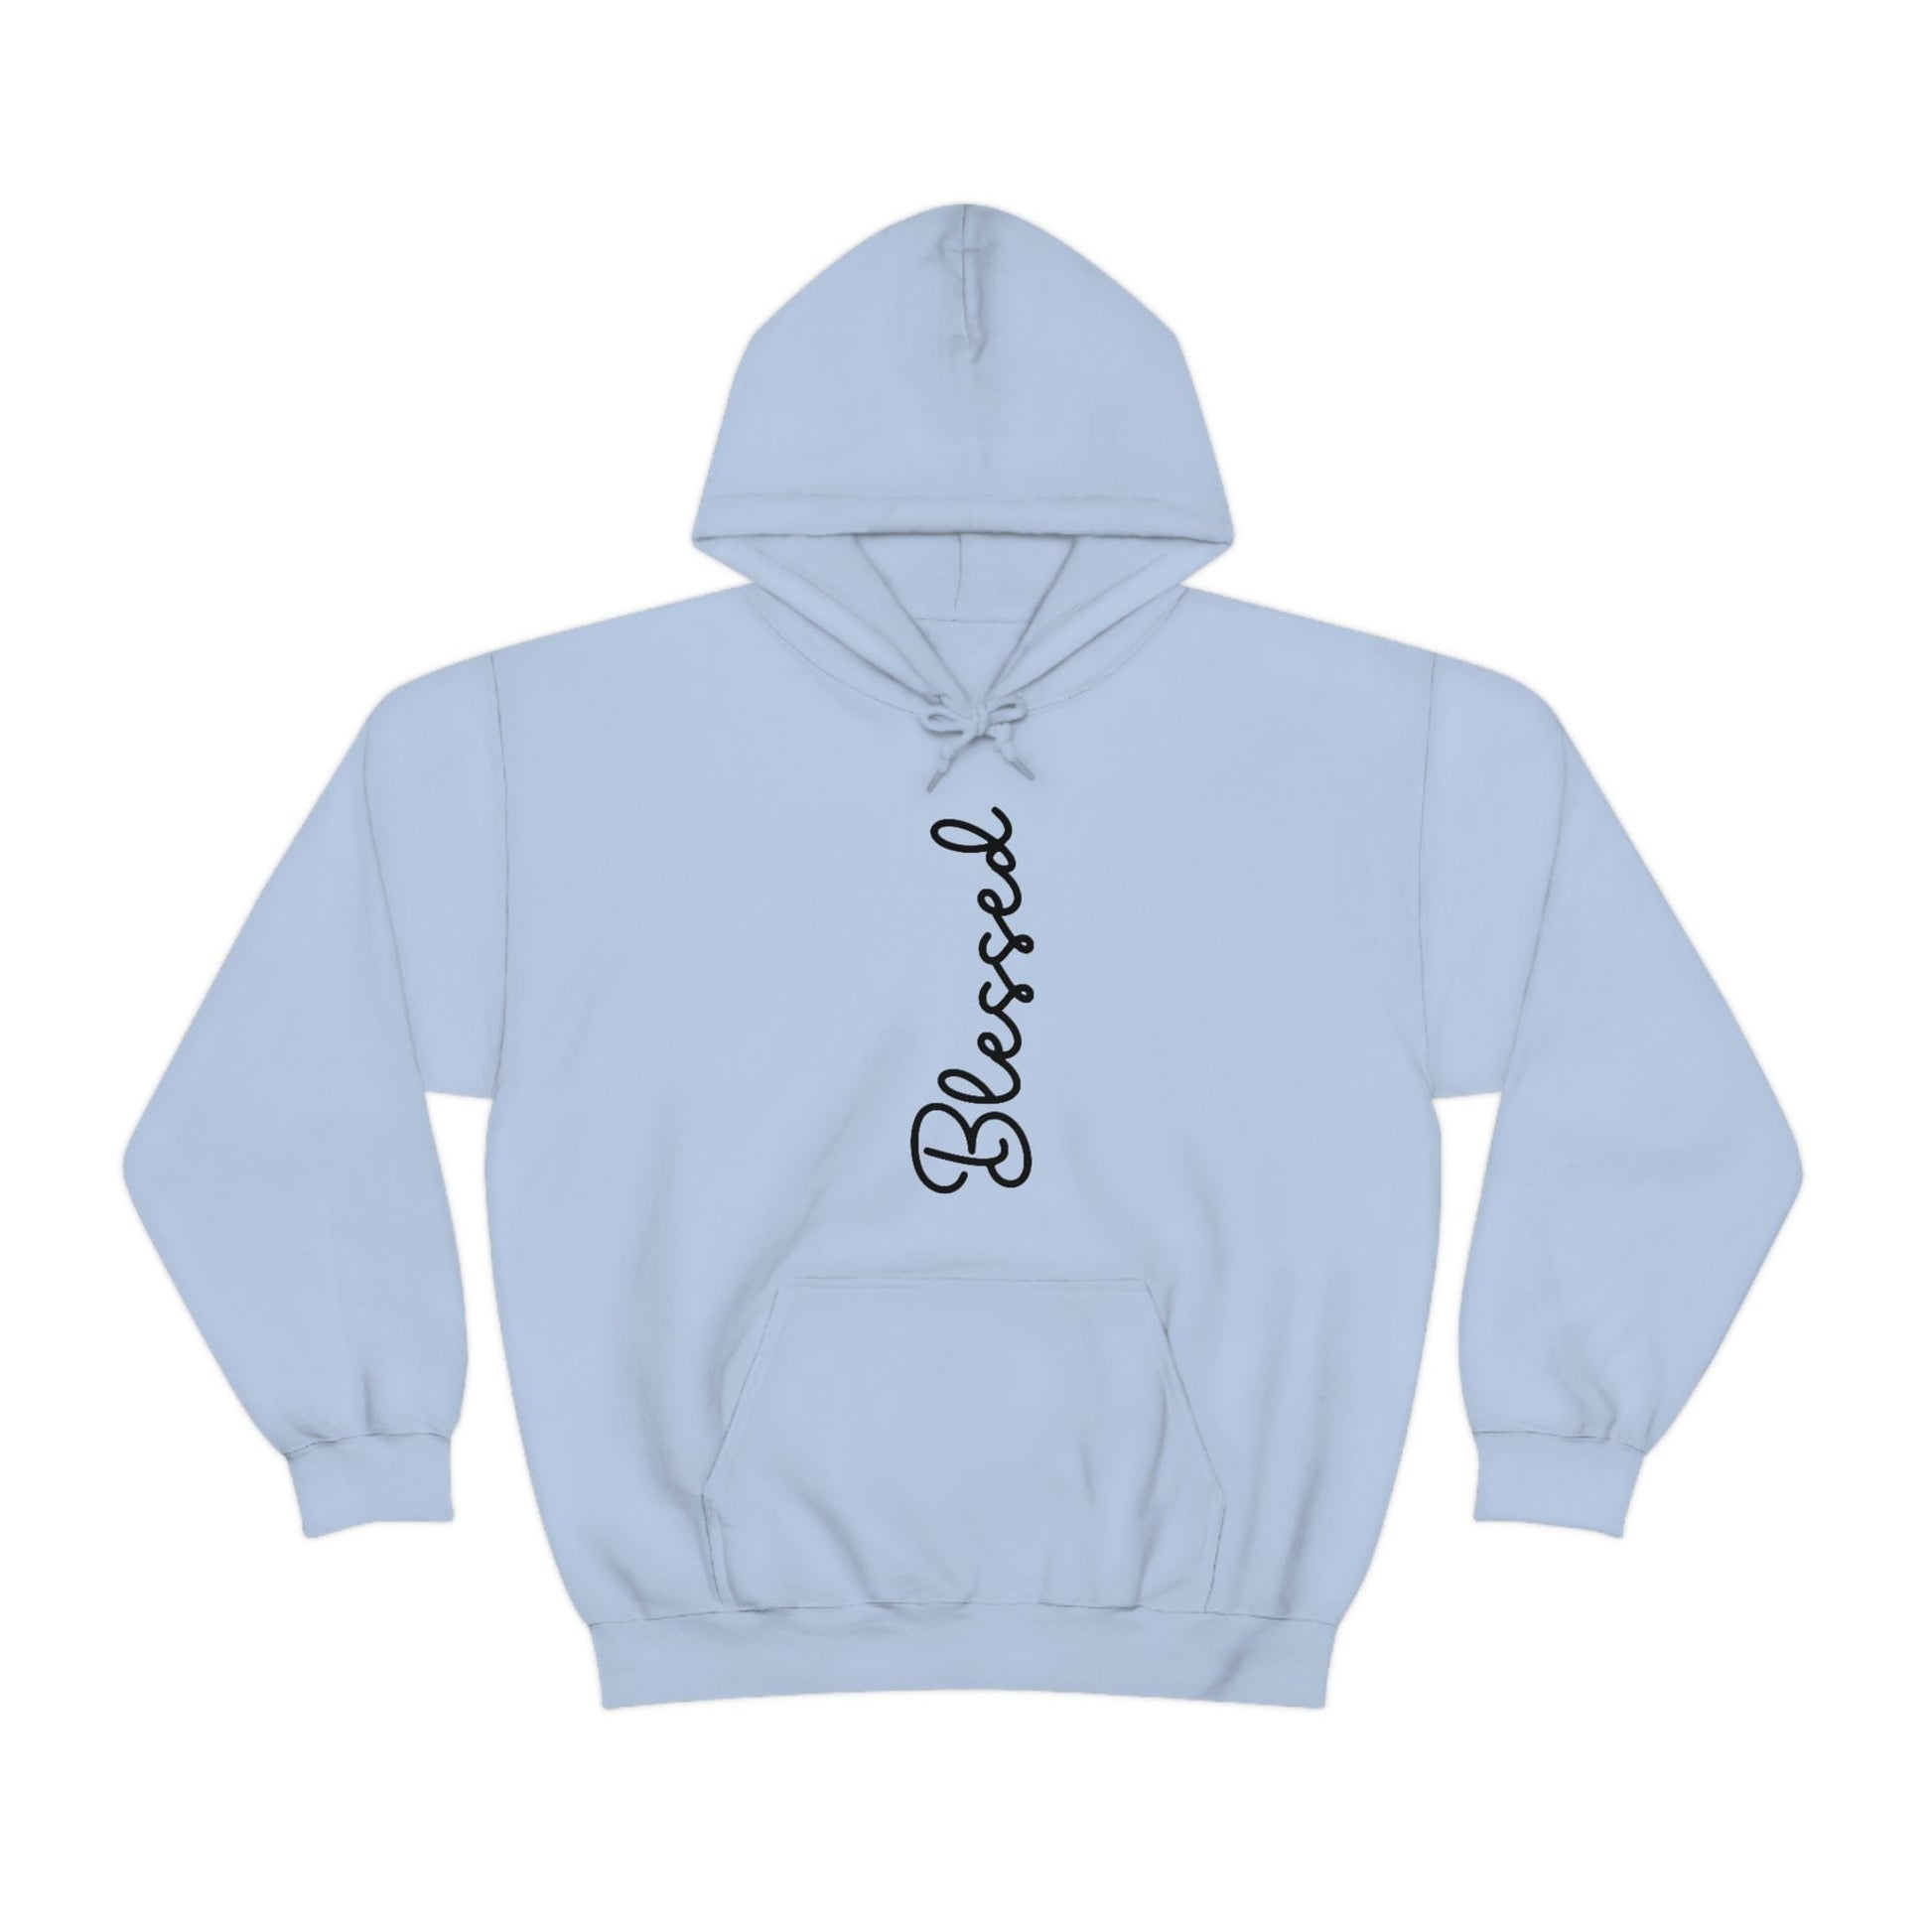 blessed hoodie, faith-based clothing, Christian apparel, inspirational clothing.